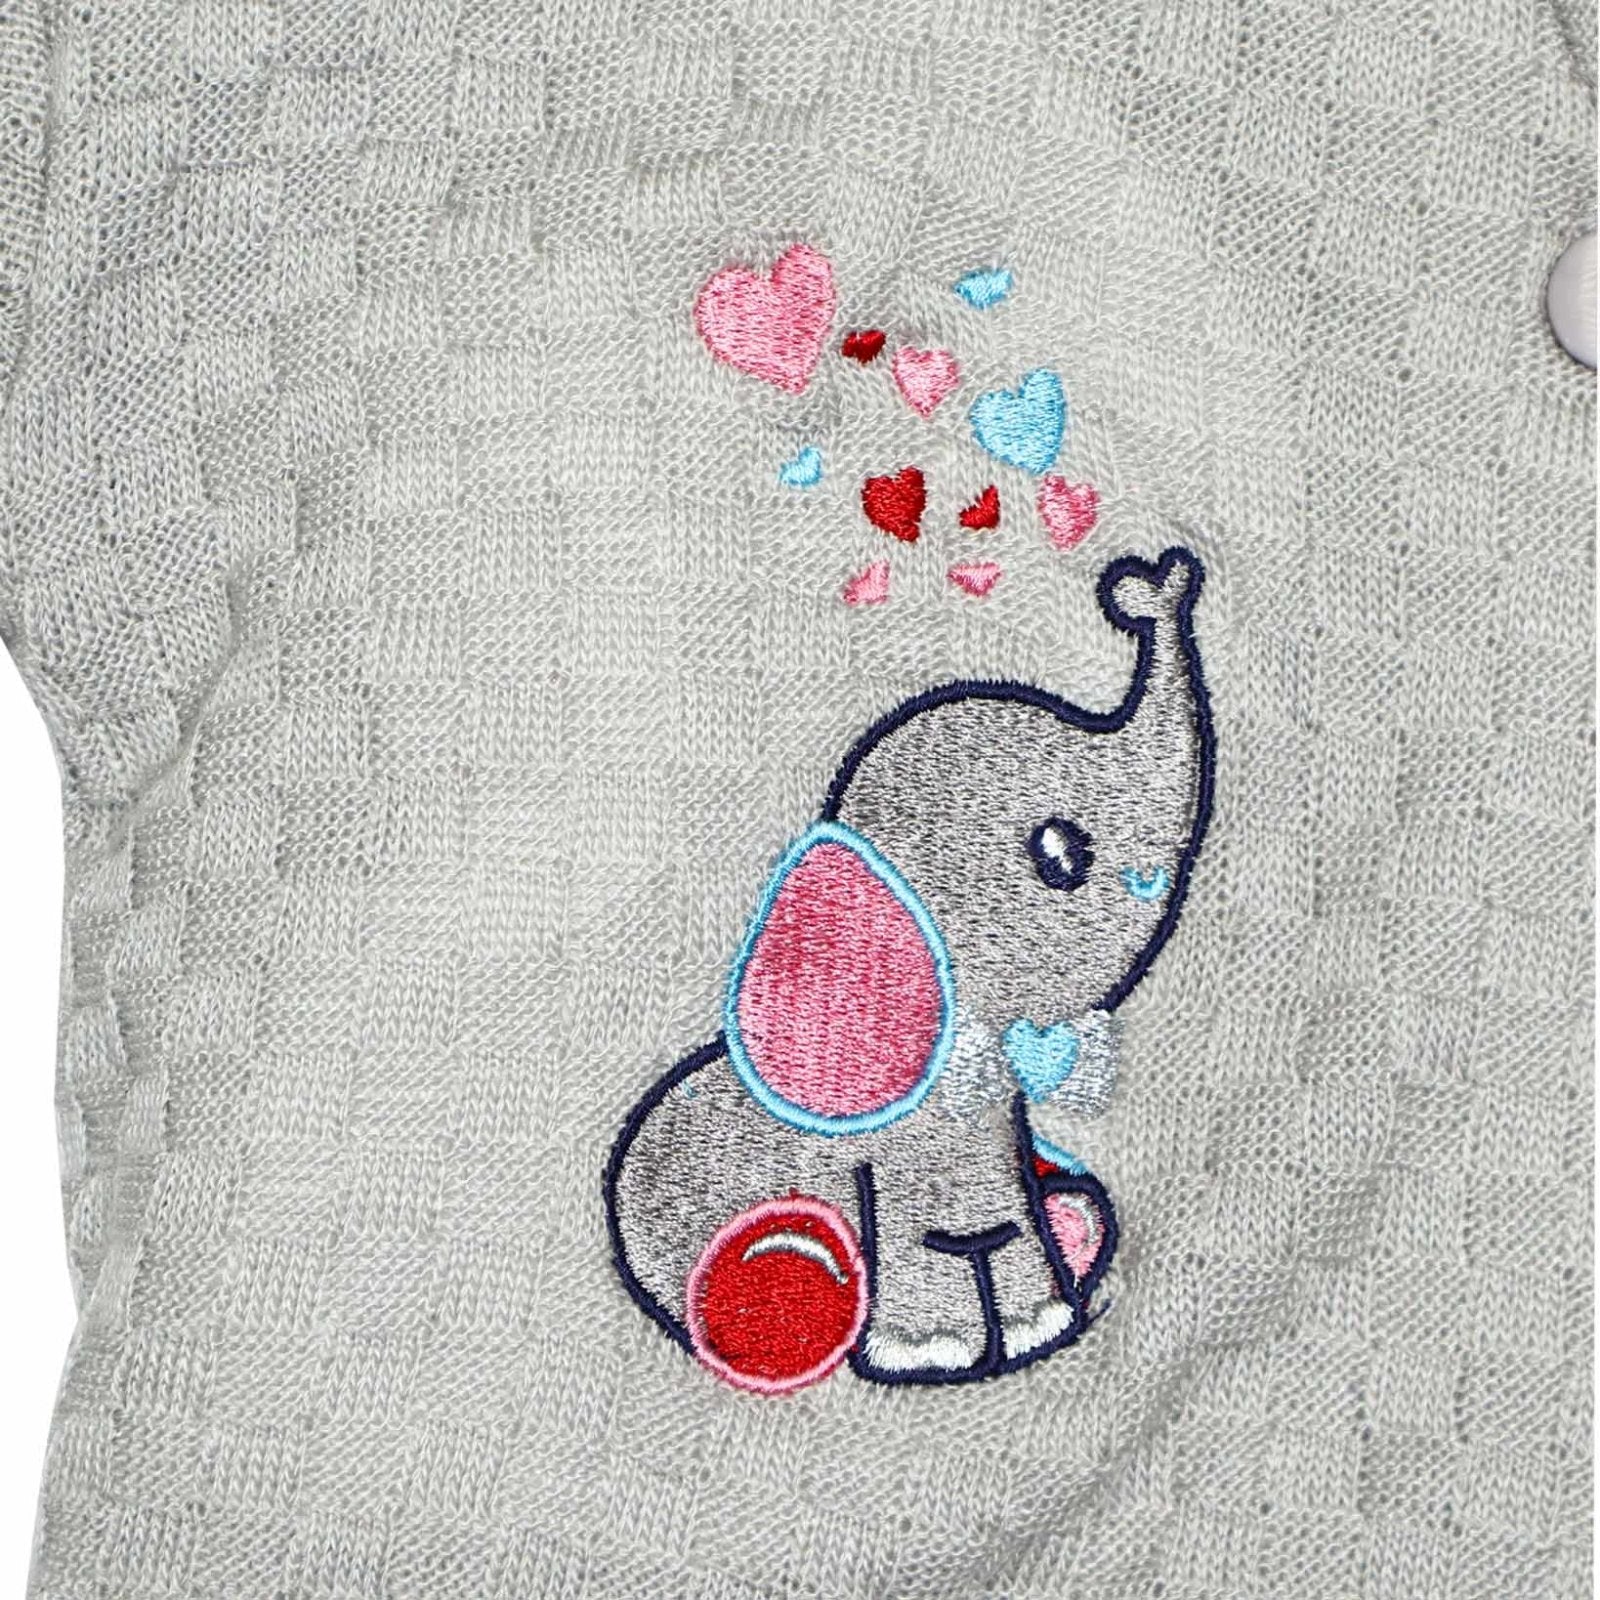 Hooded Woolen Romper Elephant Embroidery Box Pattern Grey Color by Little Darling